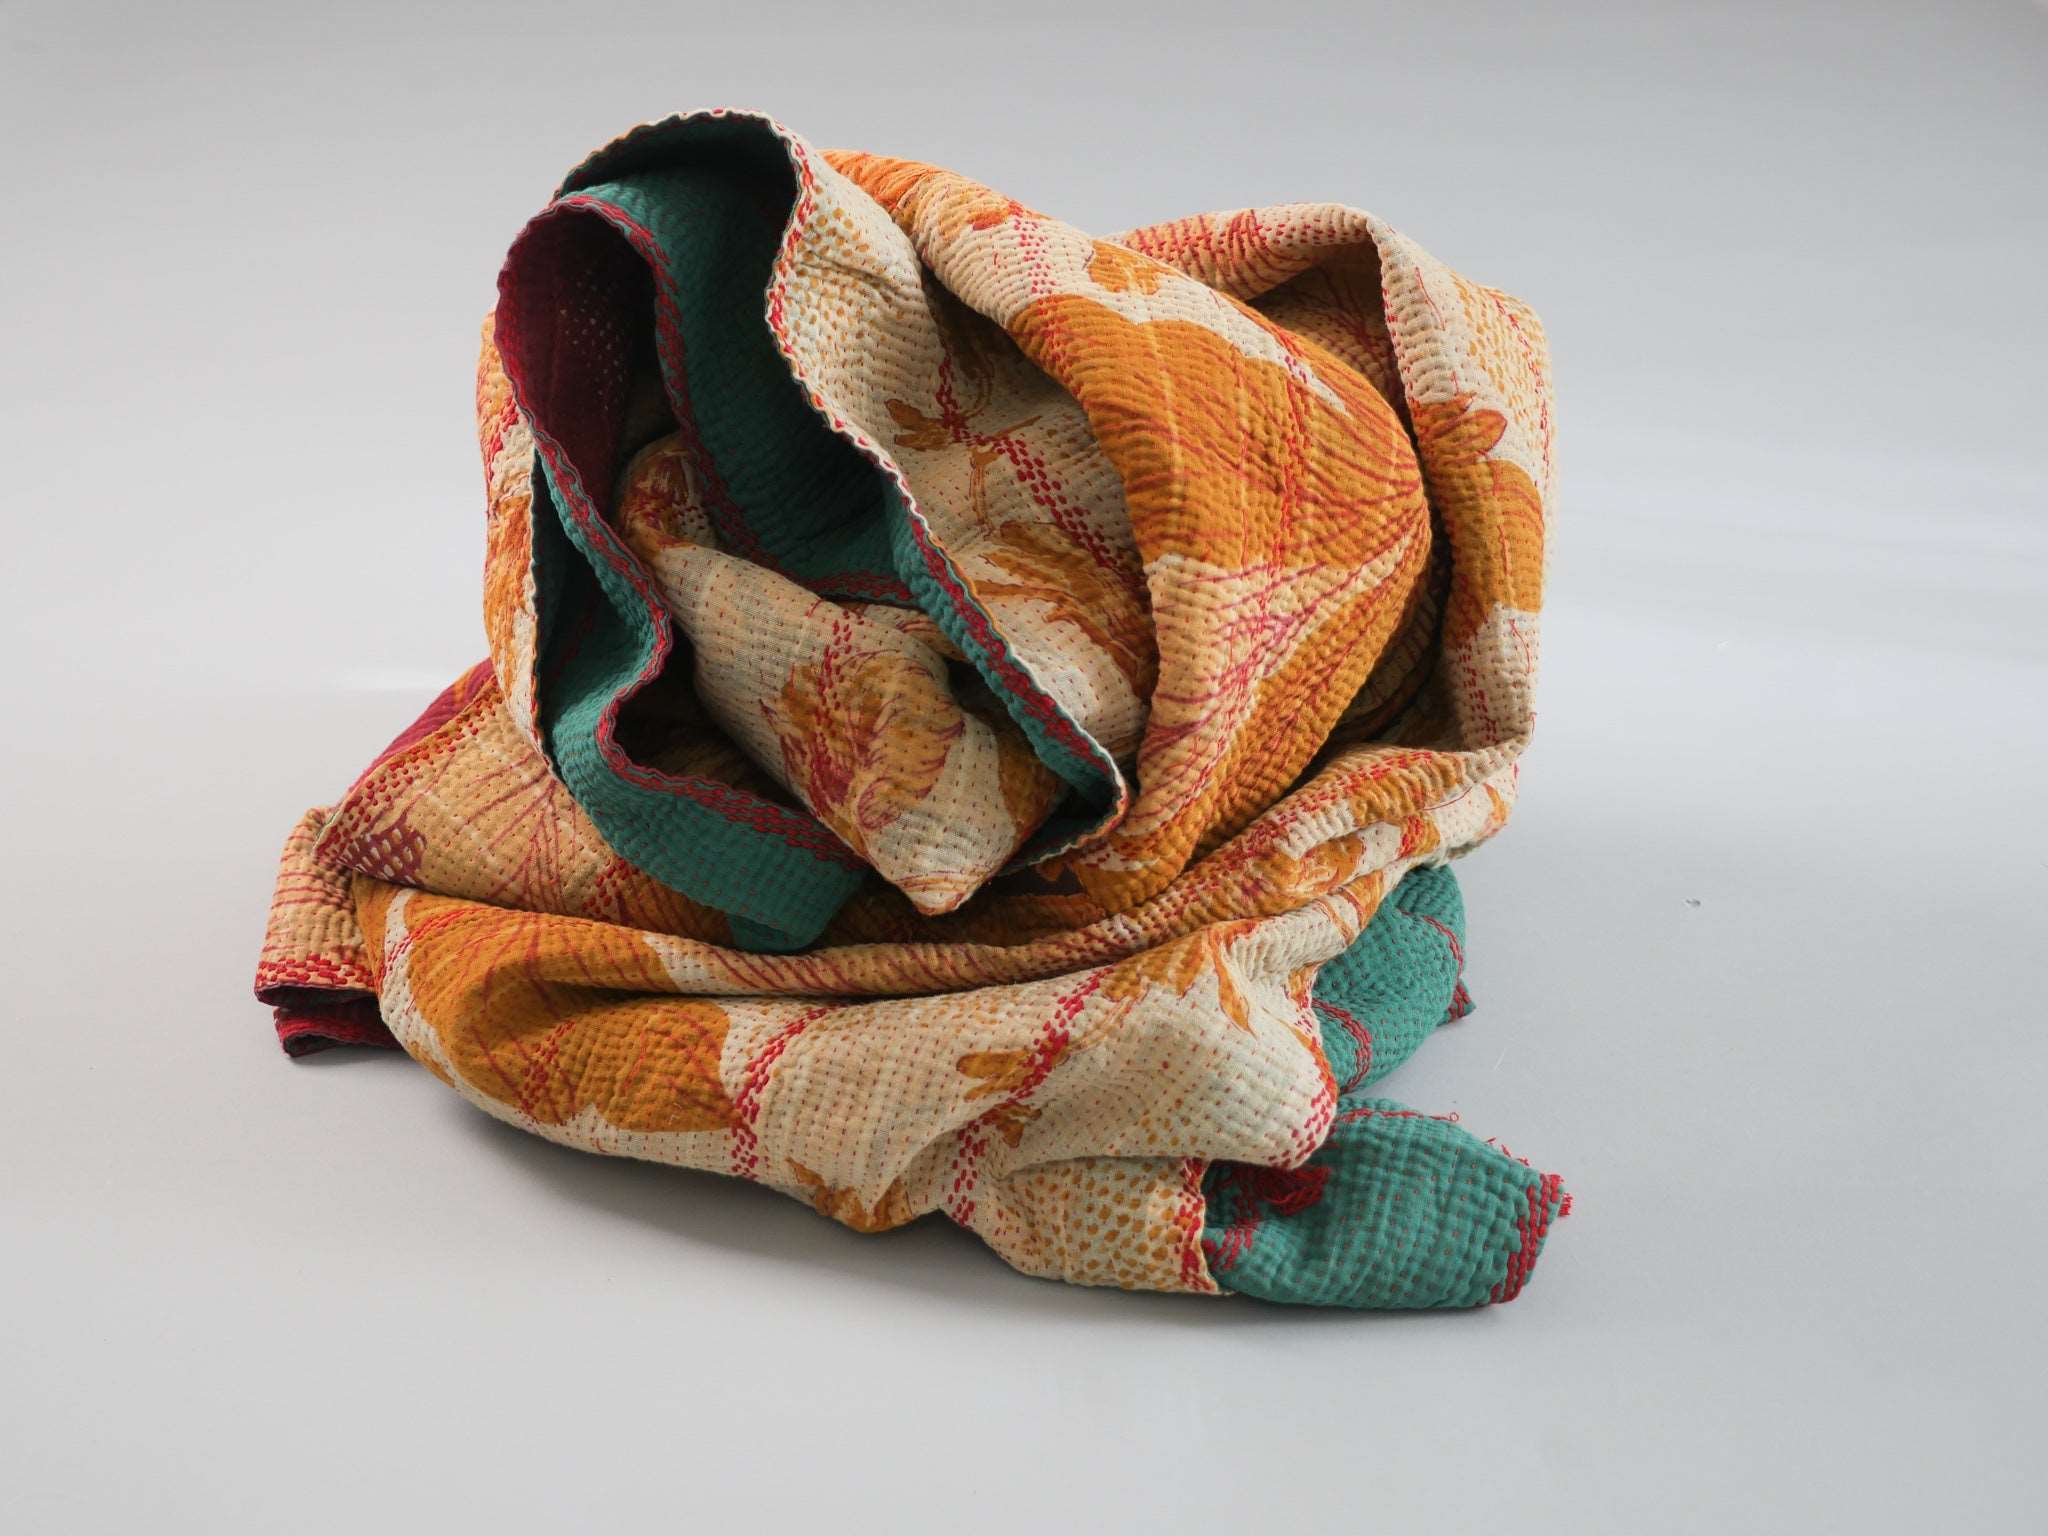 Kantha quilt in recycled cloth